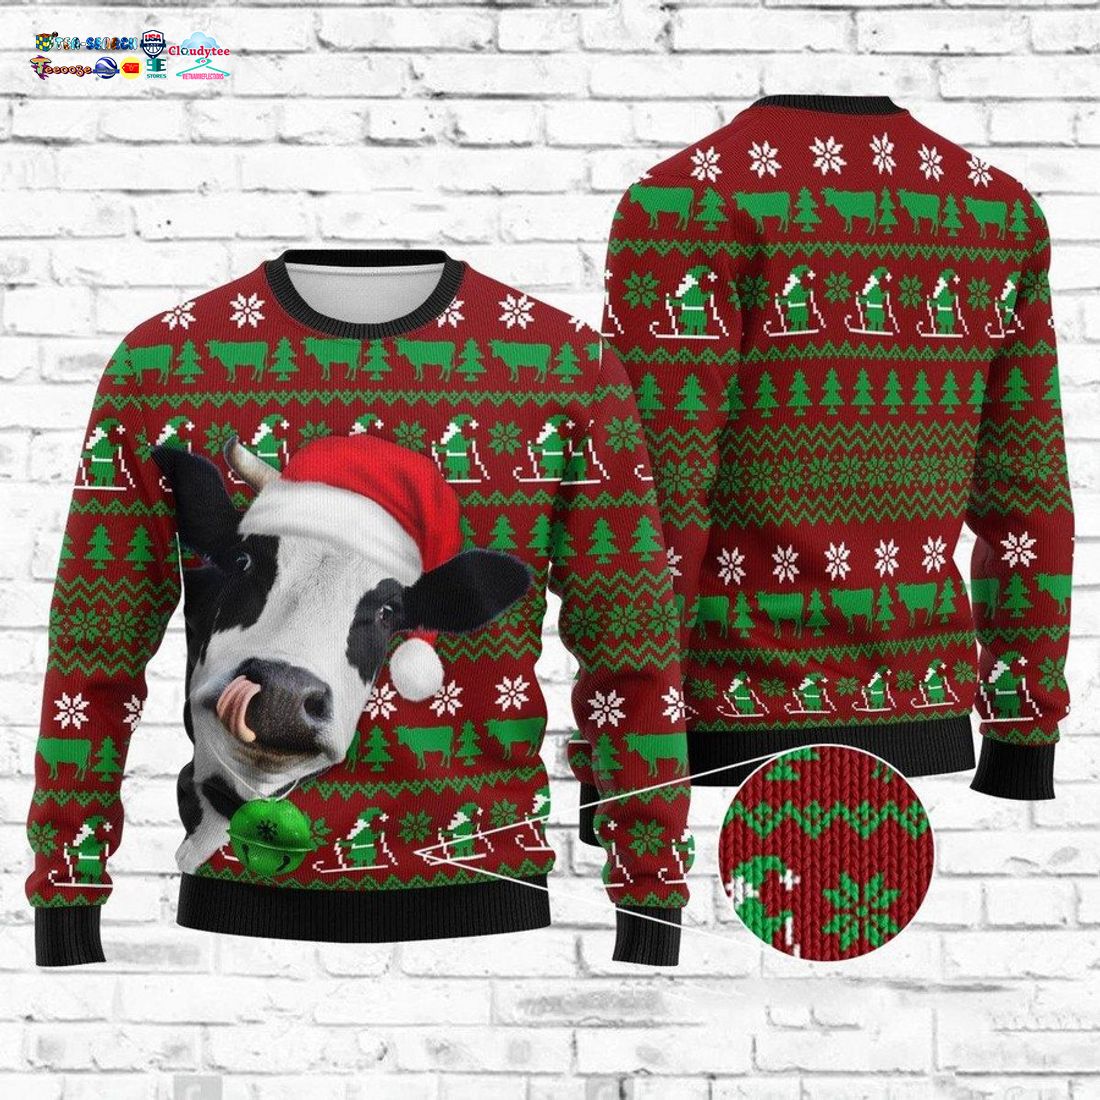 Cow Ver 4 Ugly Christmas Sweater - Good click